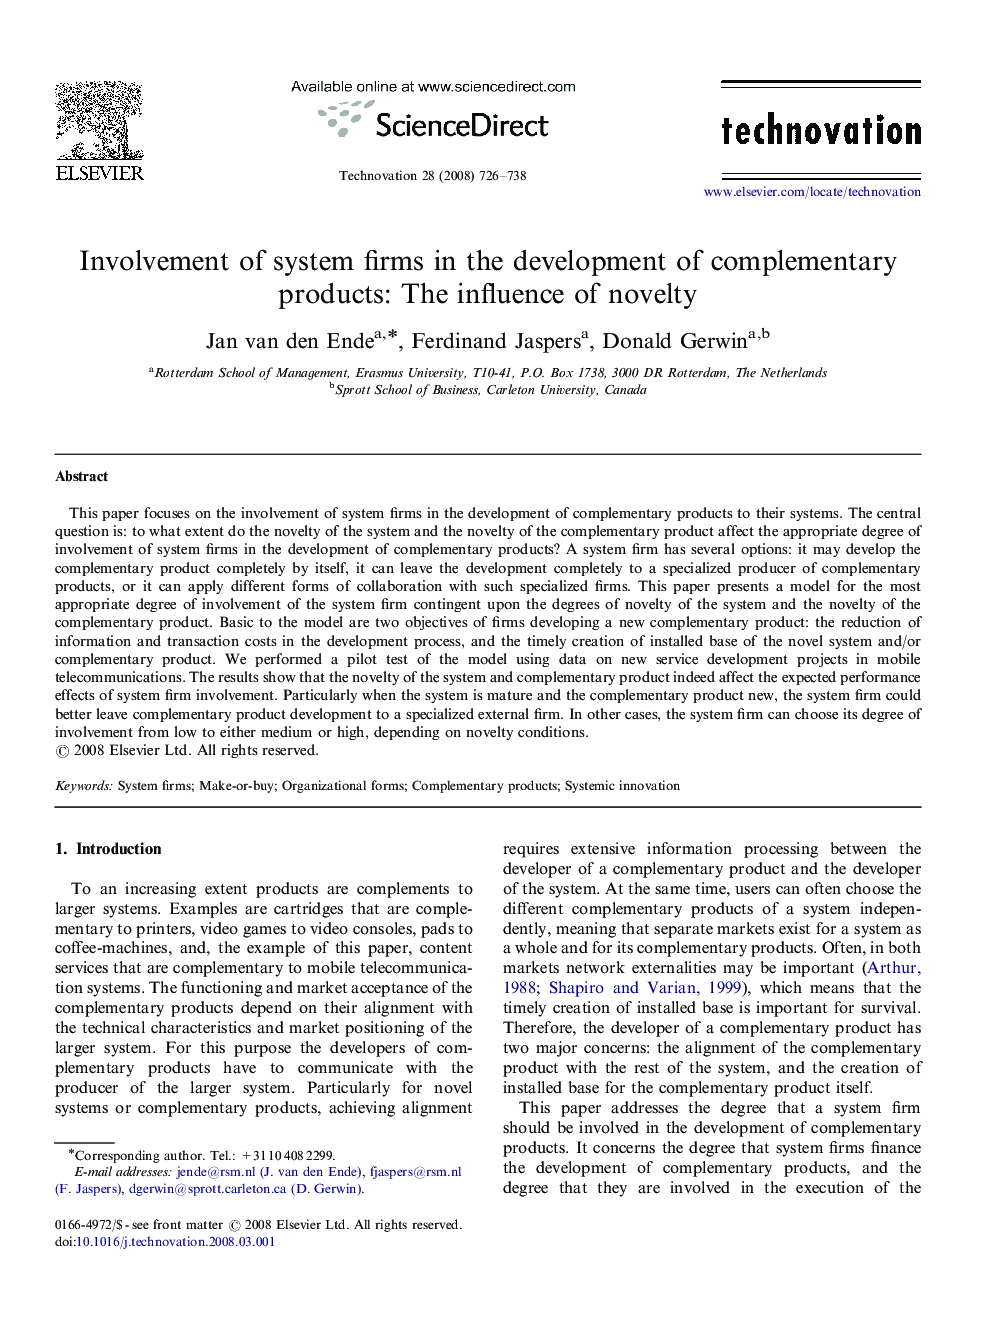 Involvement of system firms in the development of complementary products: The influence of novelty